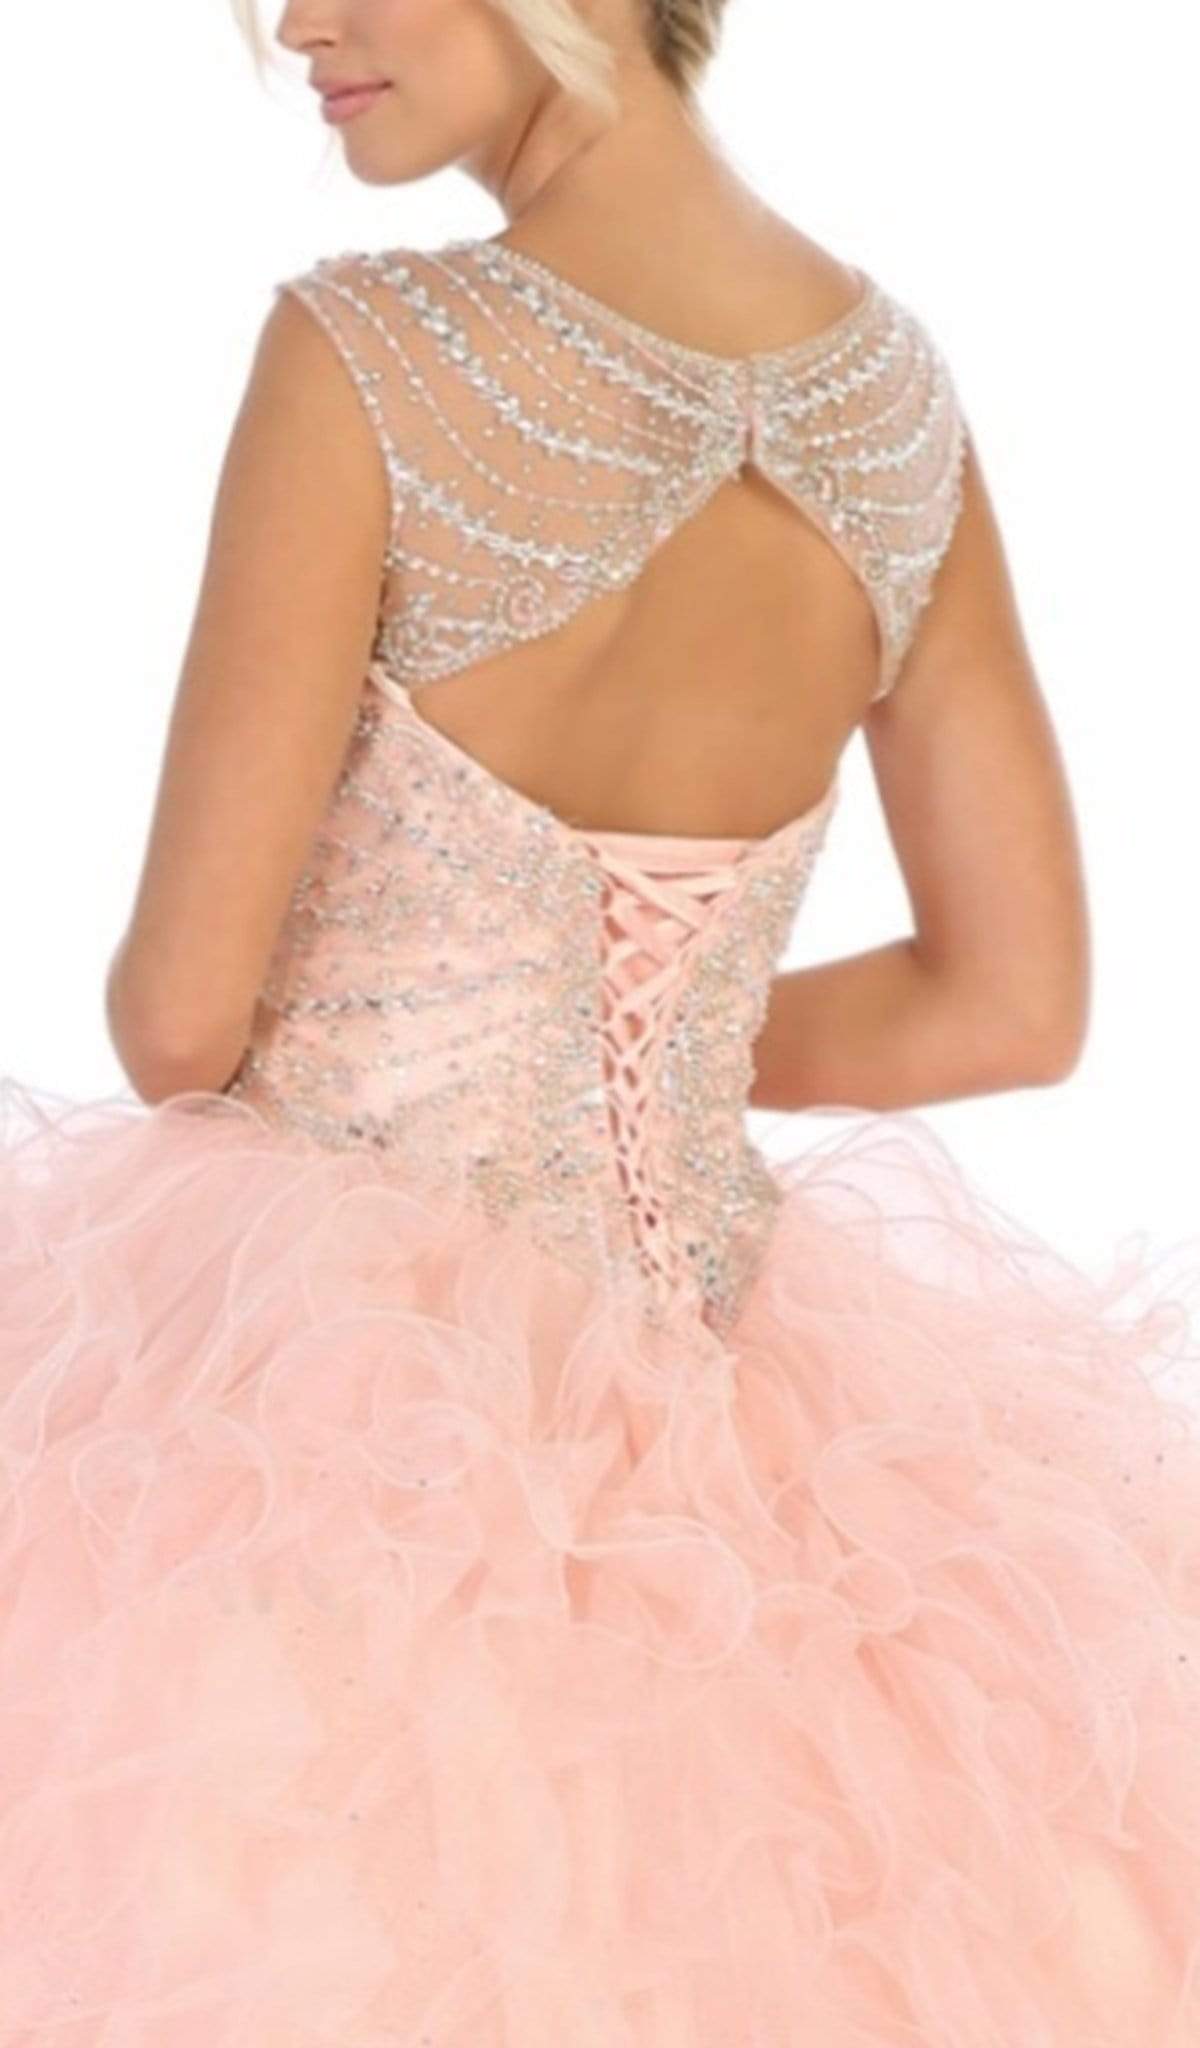 May Queen - LK124 Cap Sleeve Crystal Ornate Ruffled Ballgown Quinceanera Dresses